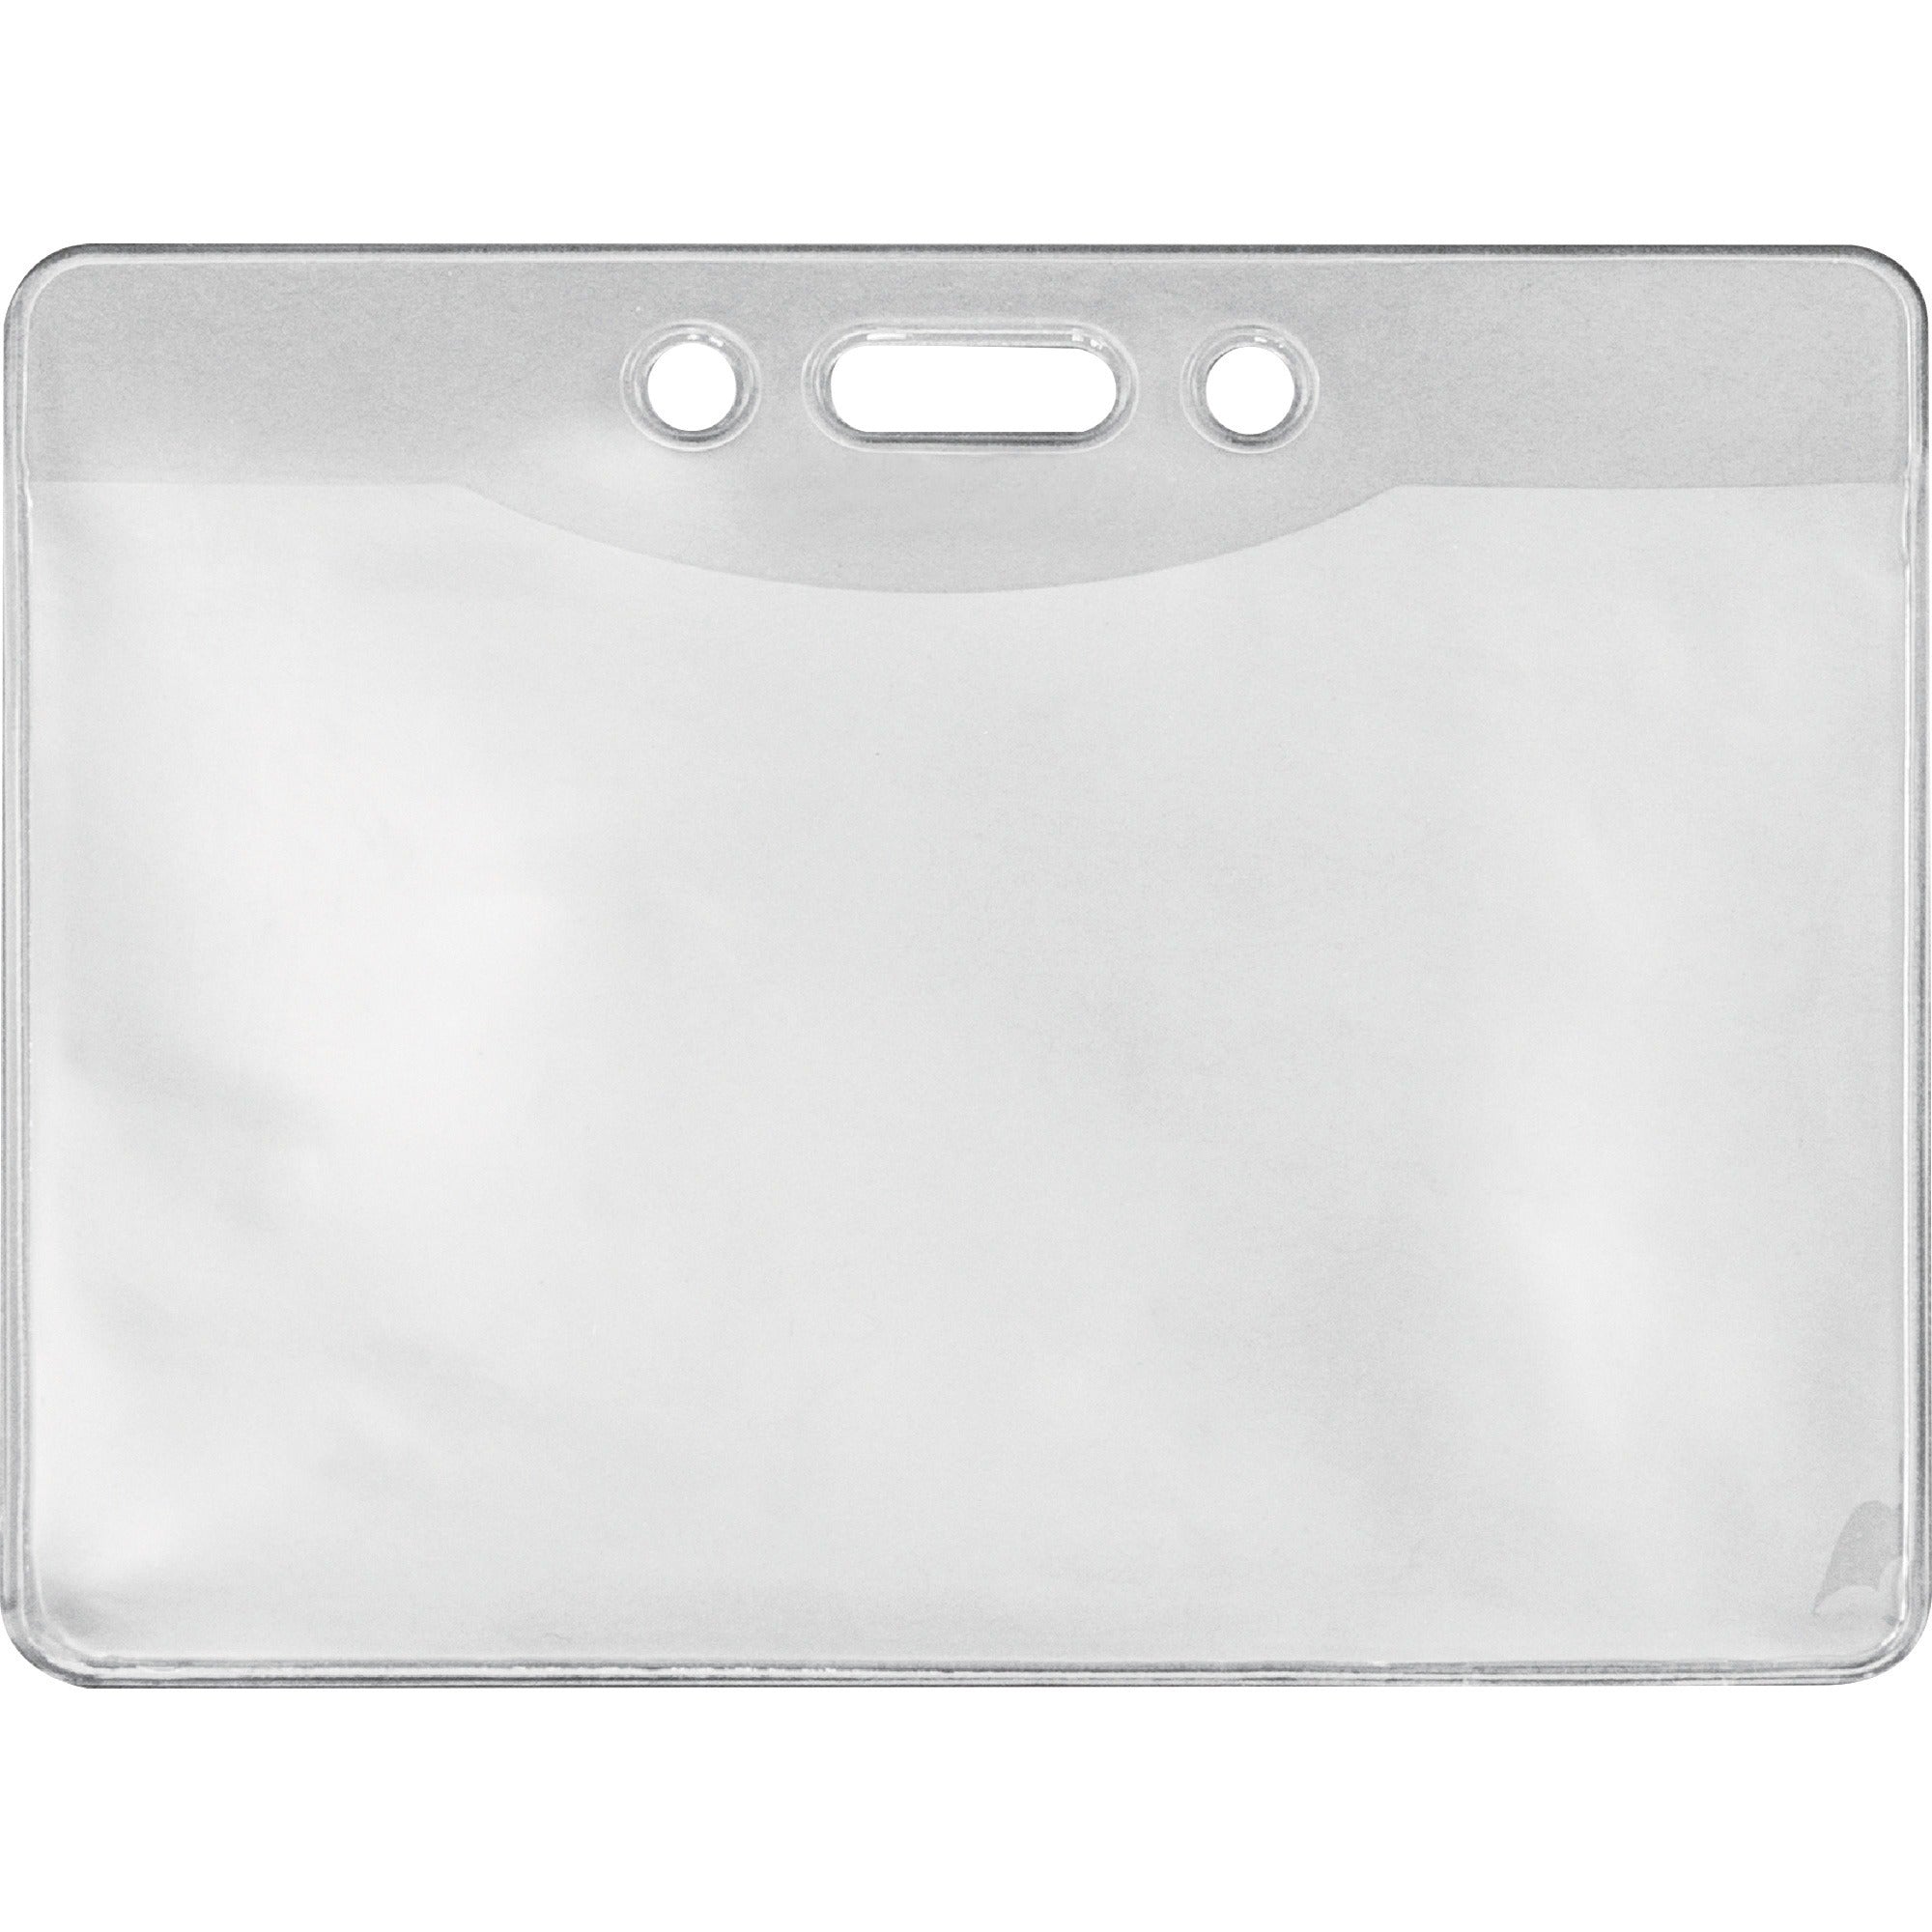 advantus-government-military-id-holders-support-4-x-275-media-horizontal-vinyl-50-pack-clear-durable_avt97096 - 1